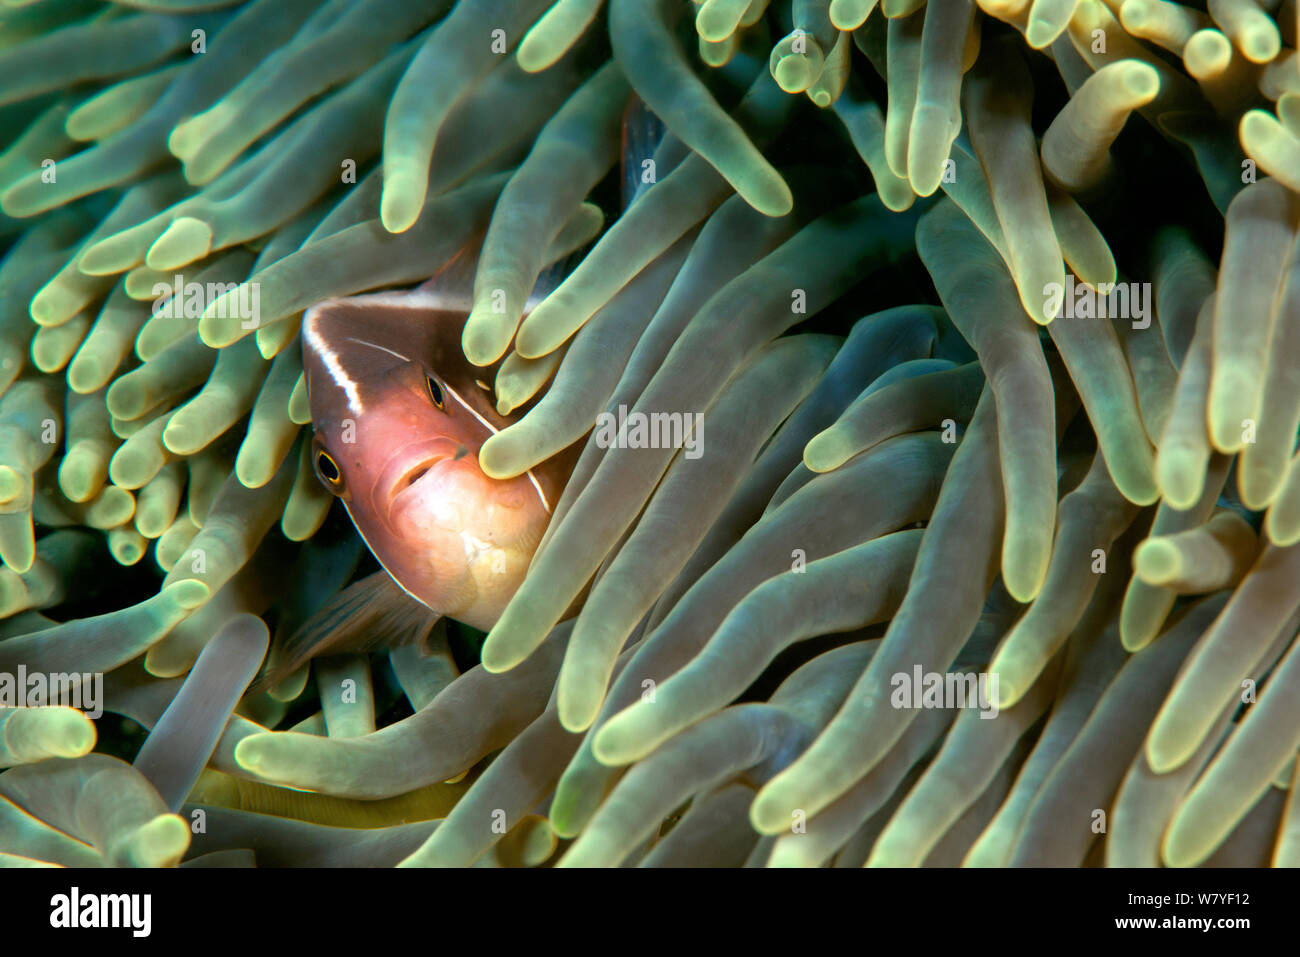 Pink clownfish (Amphiprion perideraion) in host anemone (Heteractis crispa). Lembeh Strait, North Sulawesi, Indonesia. Stock Photo